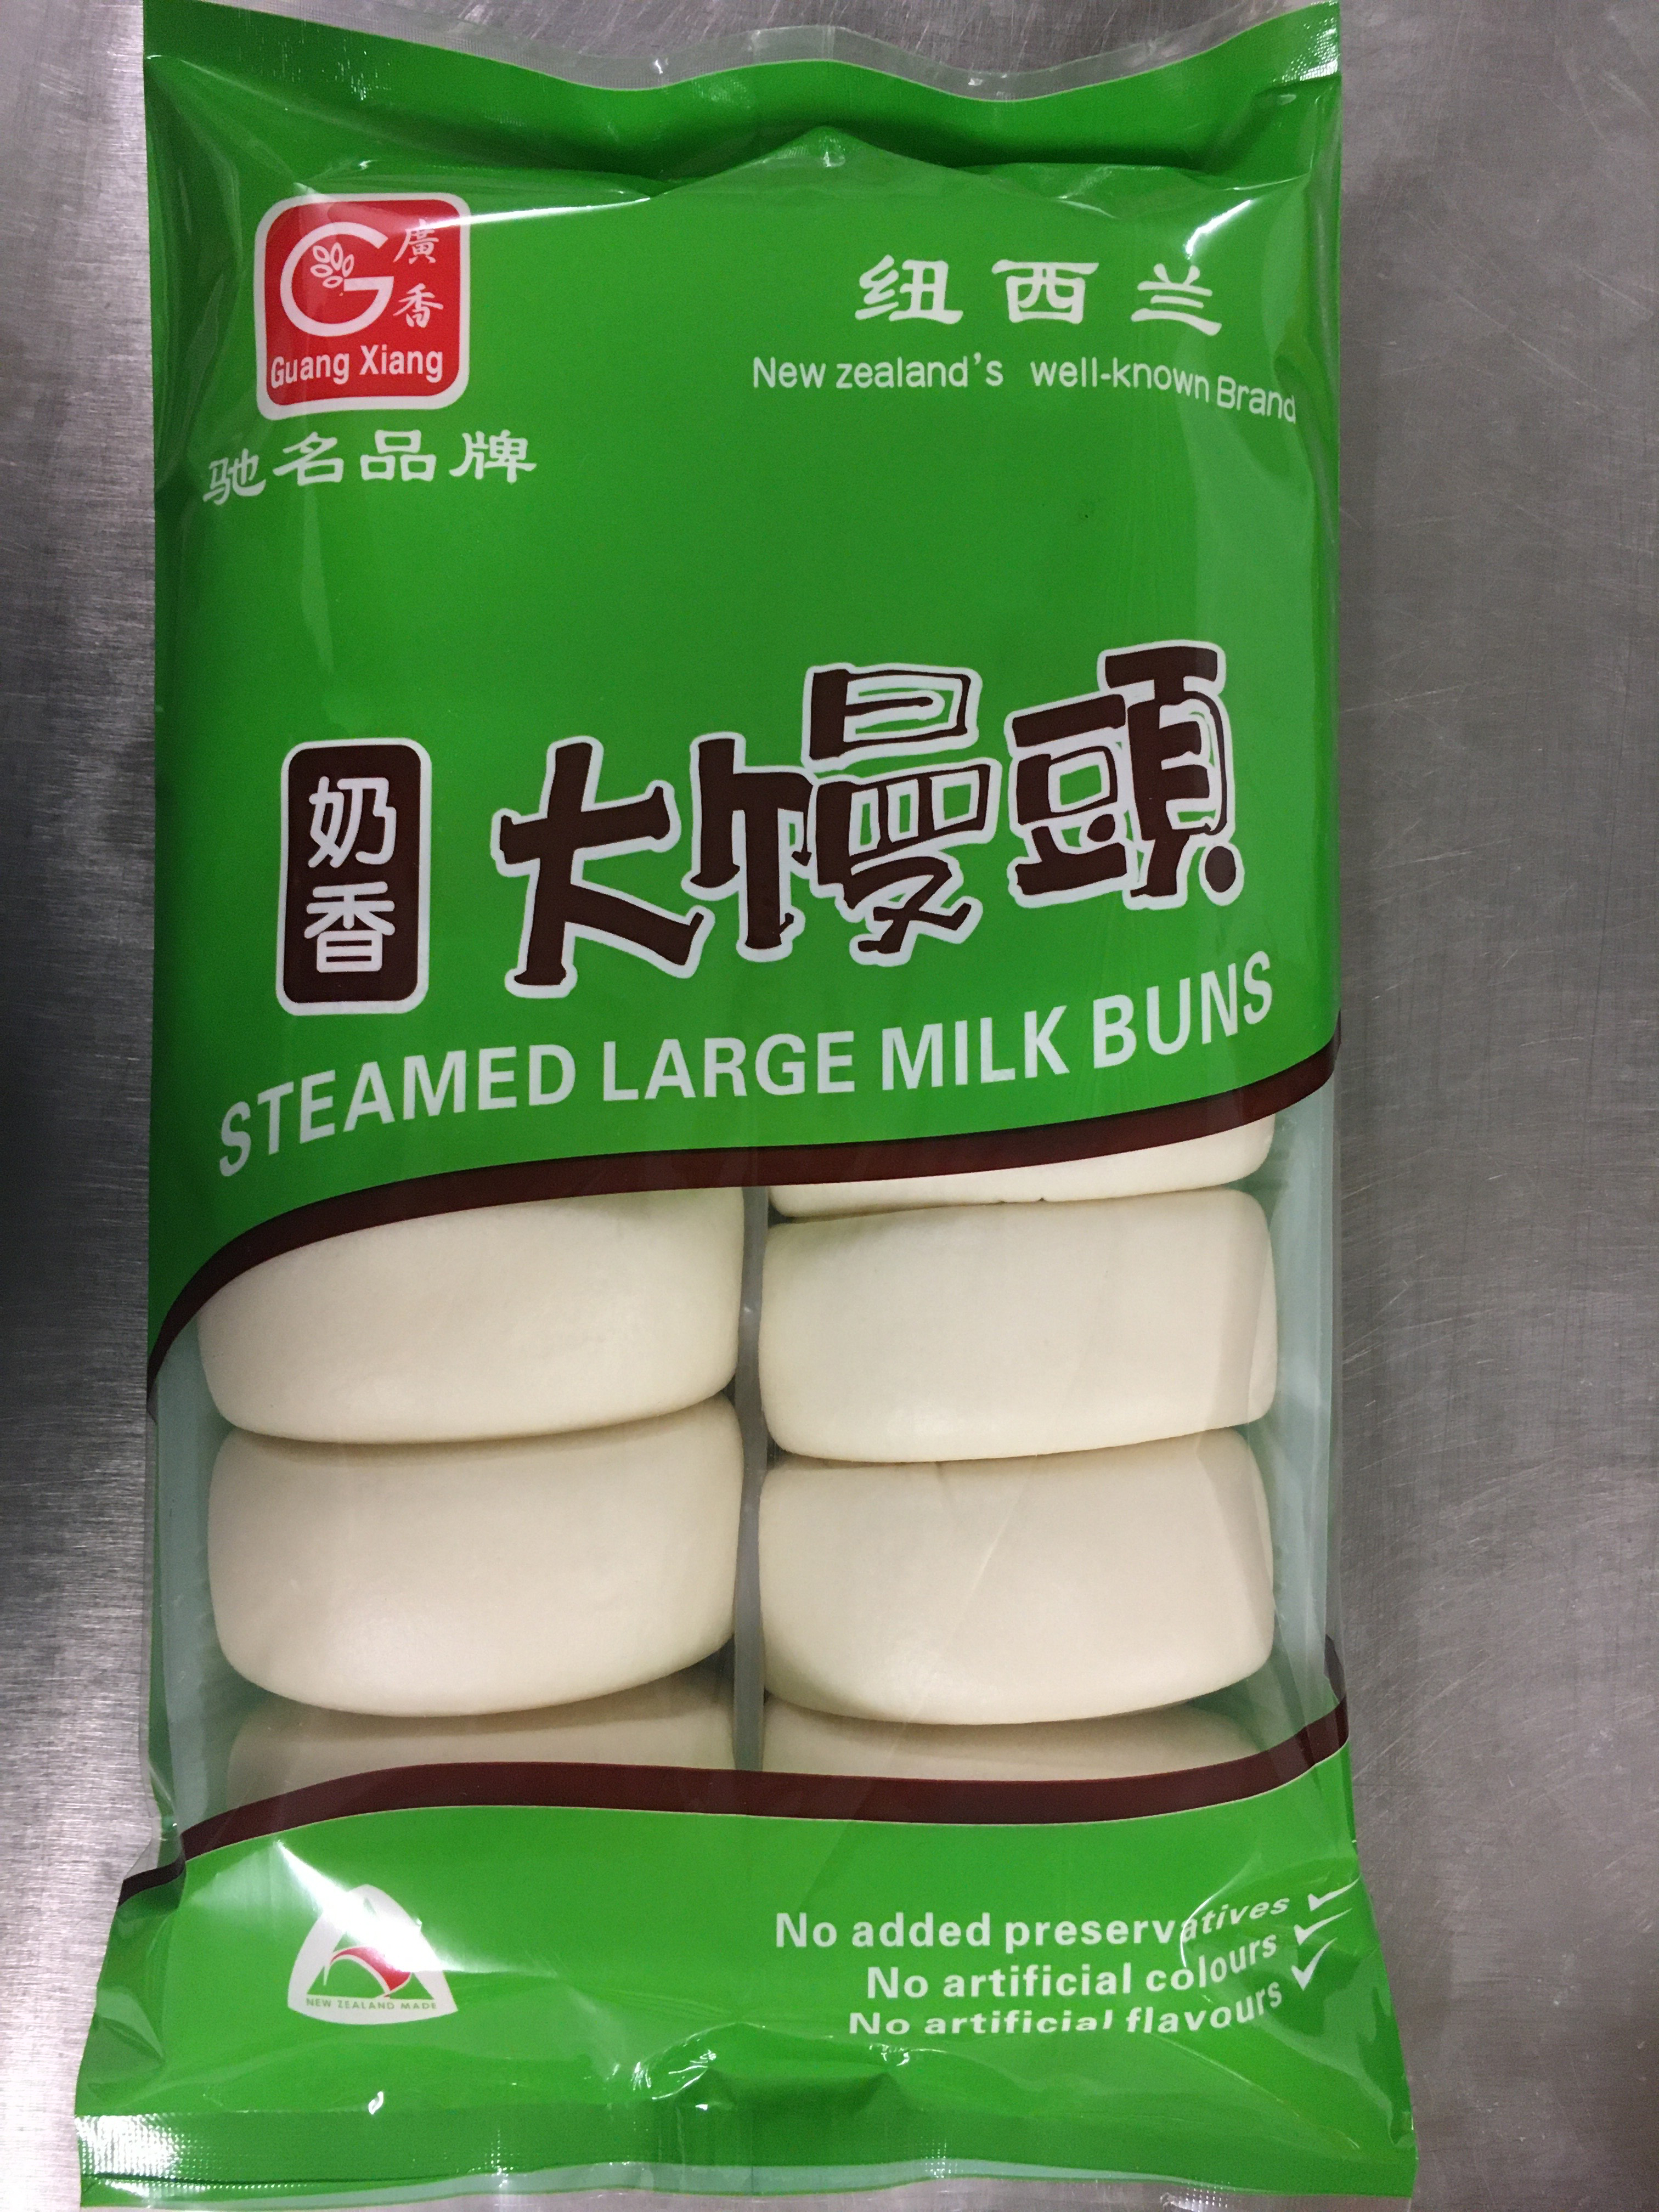 Image of Guangxiang brand Steamed Large Milk Buns (560g) in a plasti pack